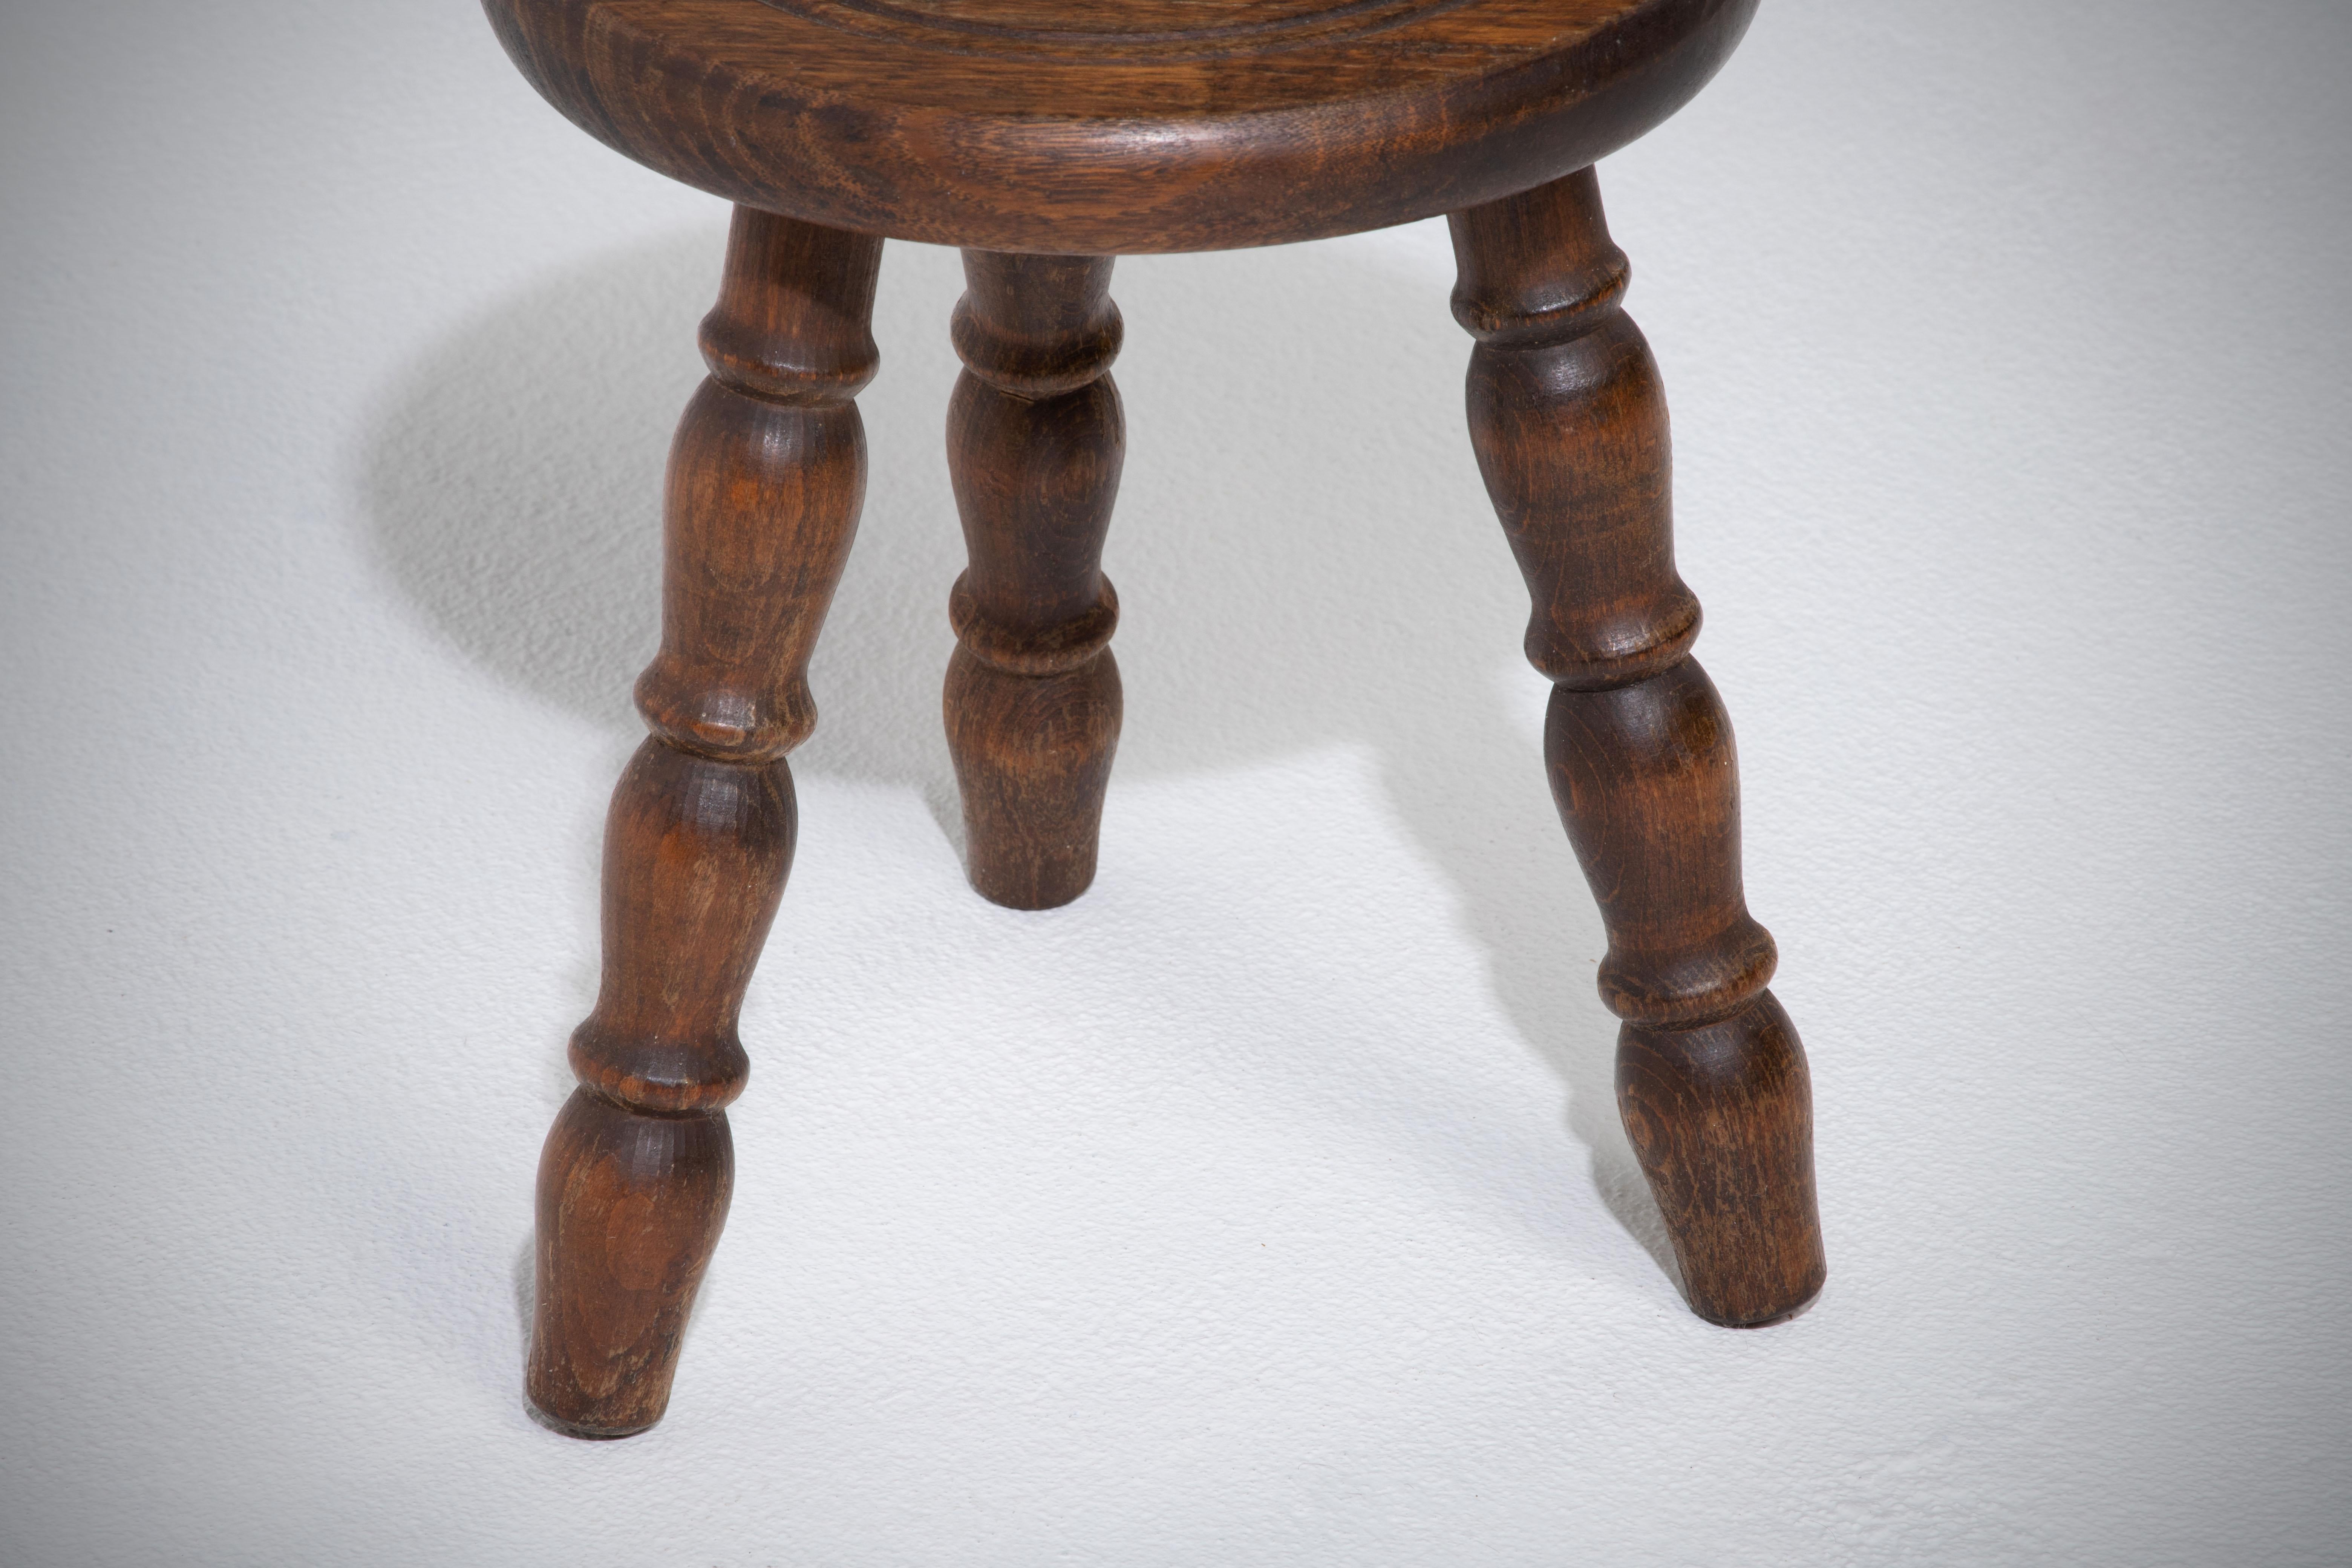 Mid-Century Modern Midcentury Oak Stool with Turned Wood Legs, 1960s, France For Sale